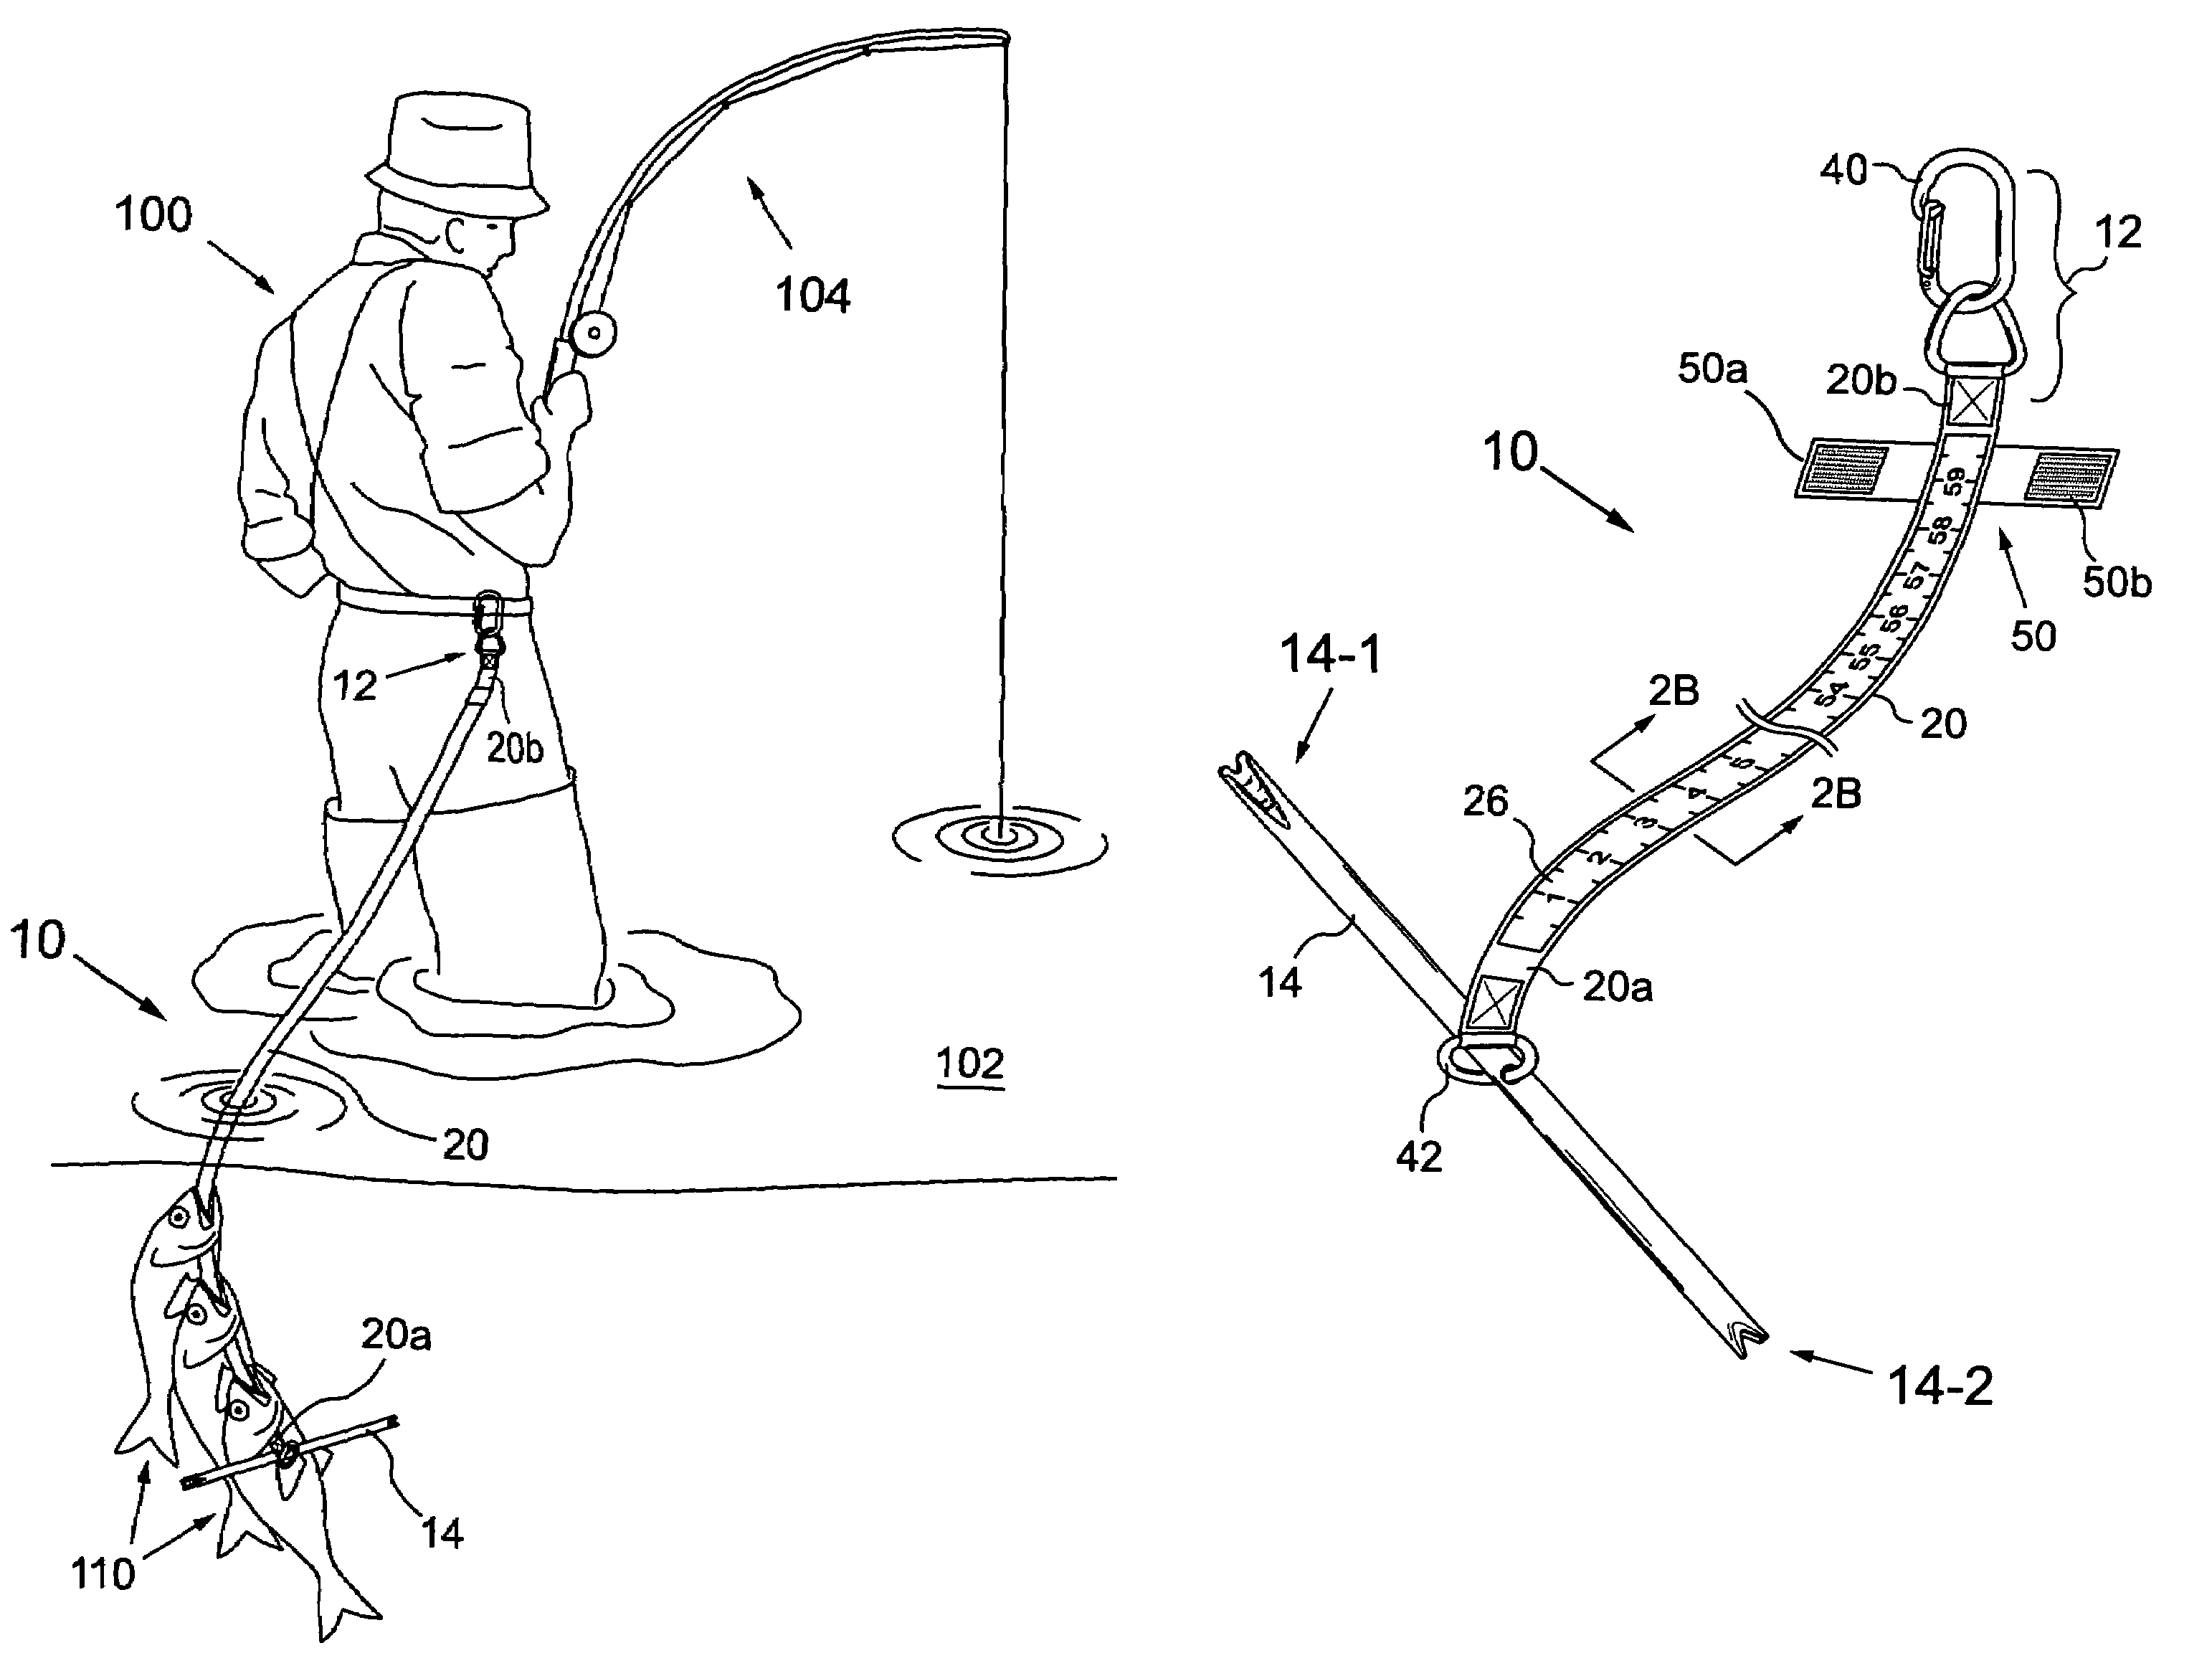 Fishing stringer with multiple integral fishing tools